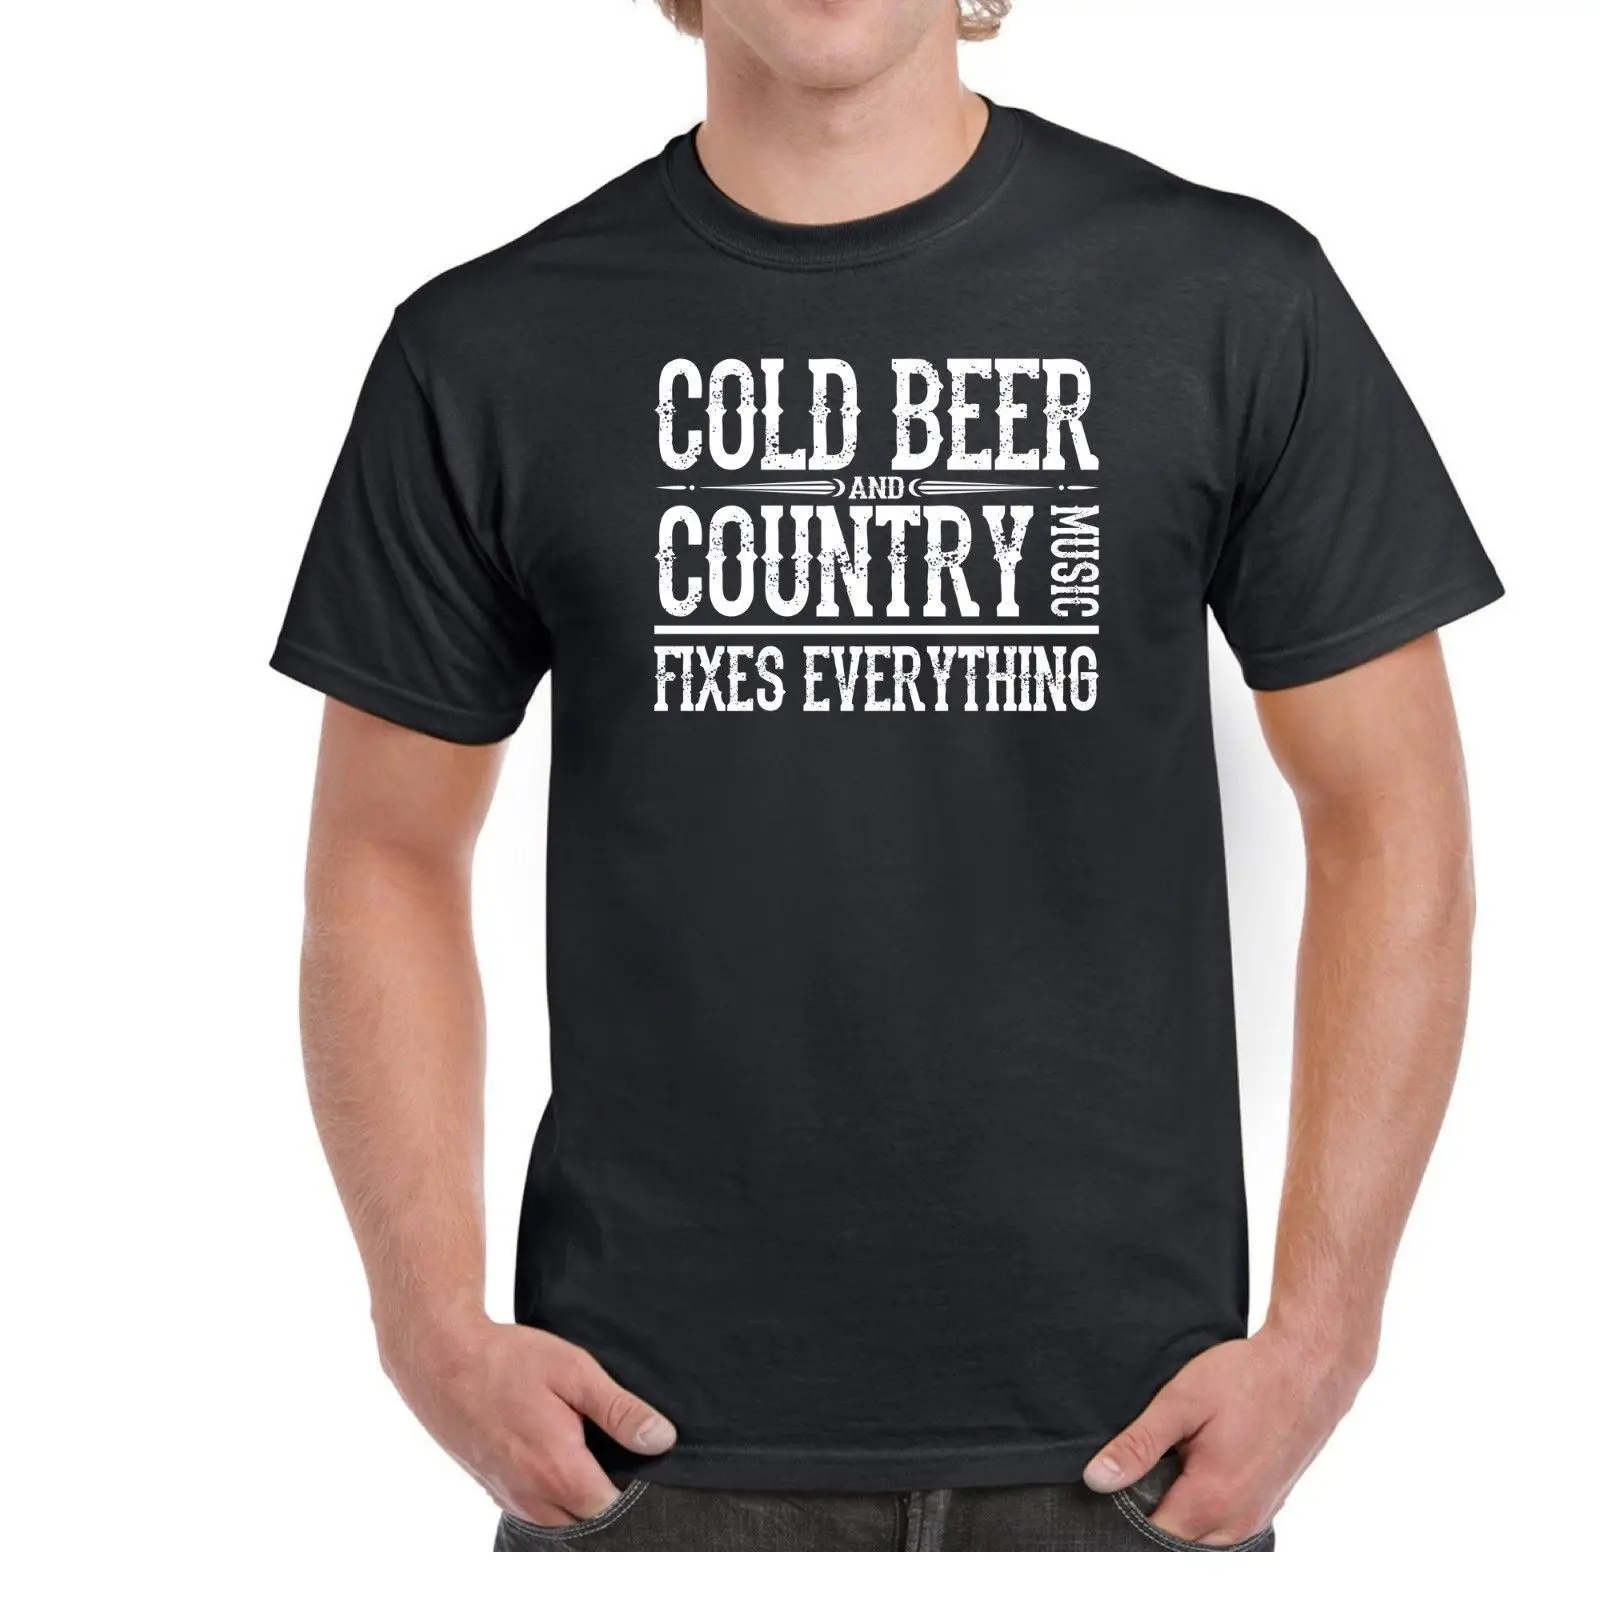 2019 New Arrival Great Quality Funny Cotton Cold Beer & Country Music ...